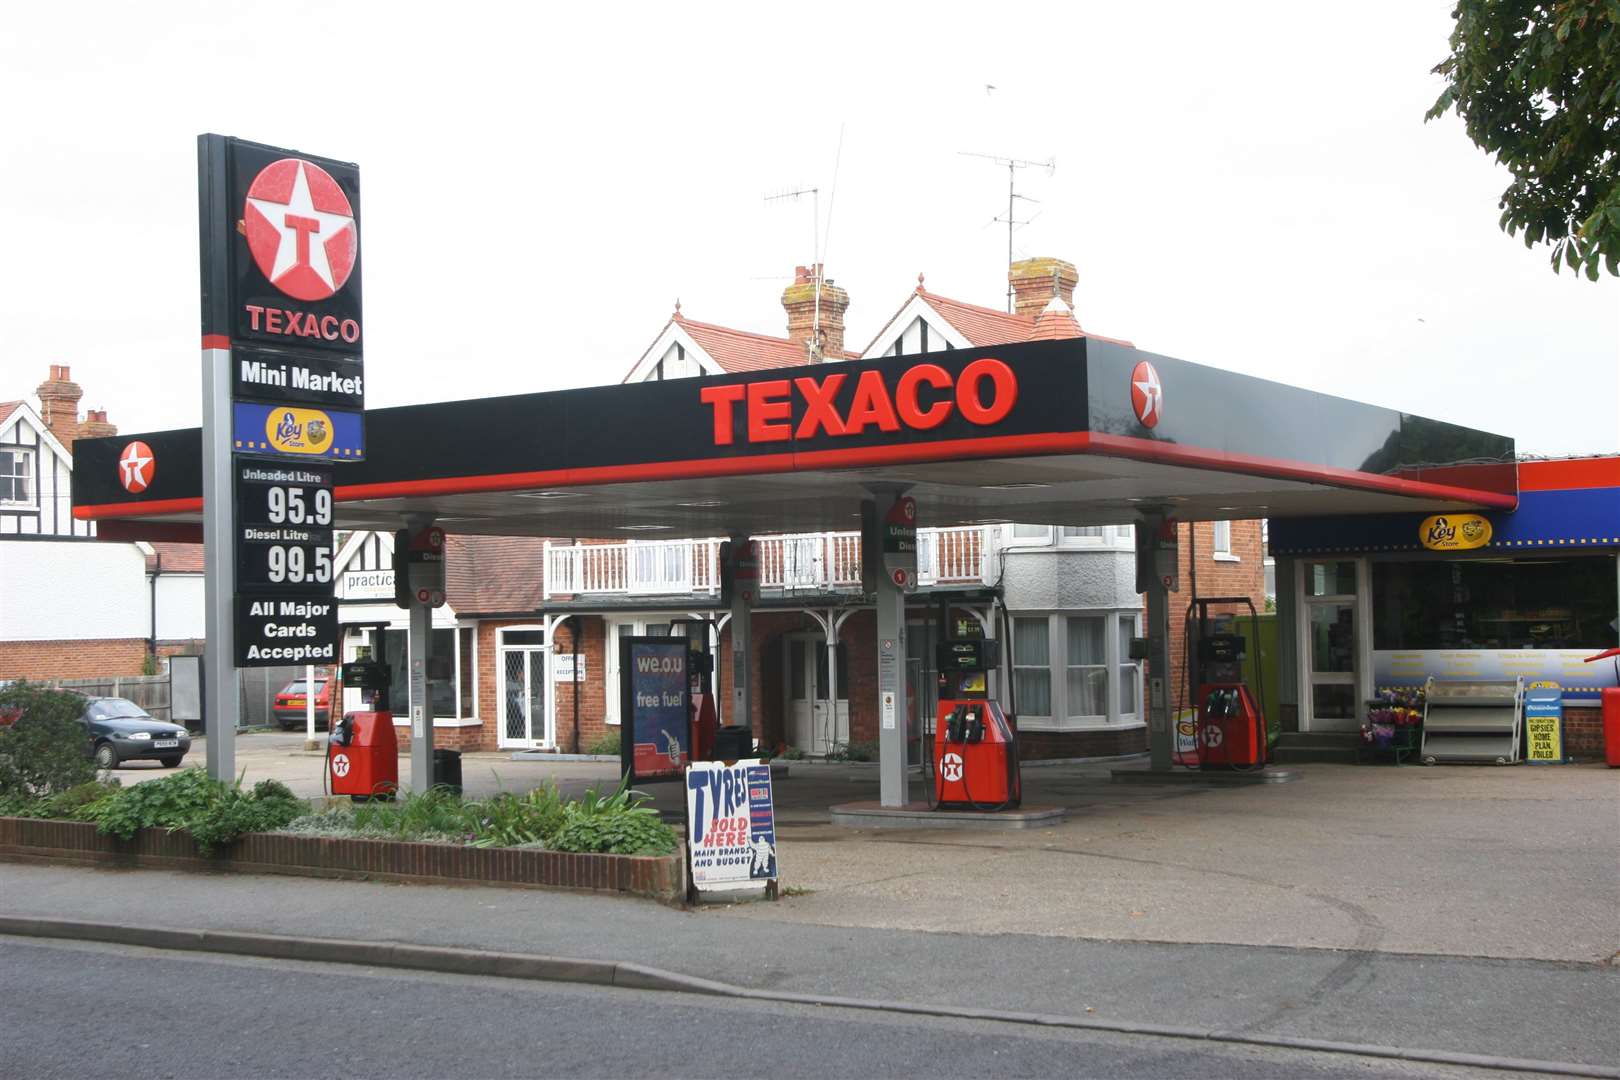 The Texaco garage site in Staplehurst will be transformed into a retirement village